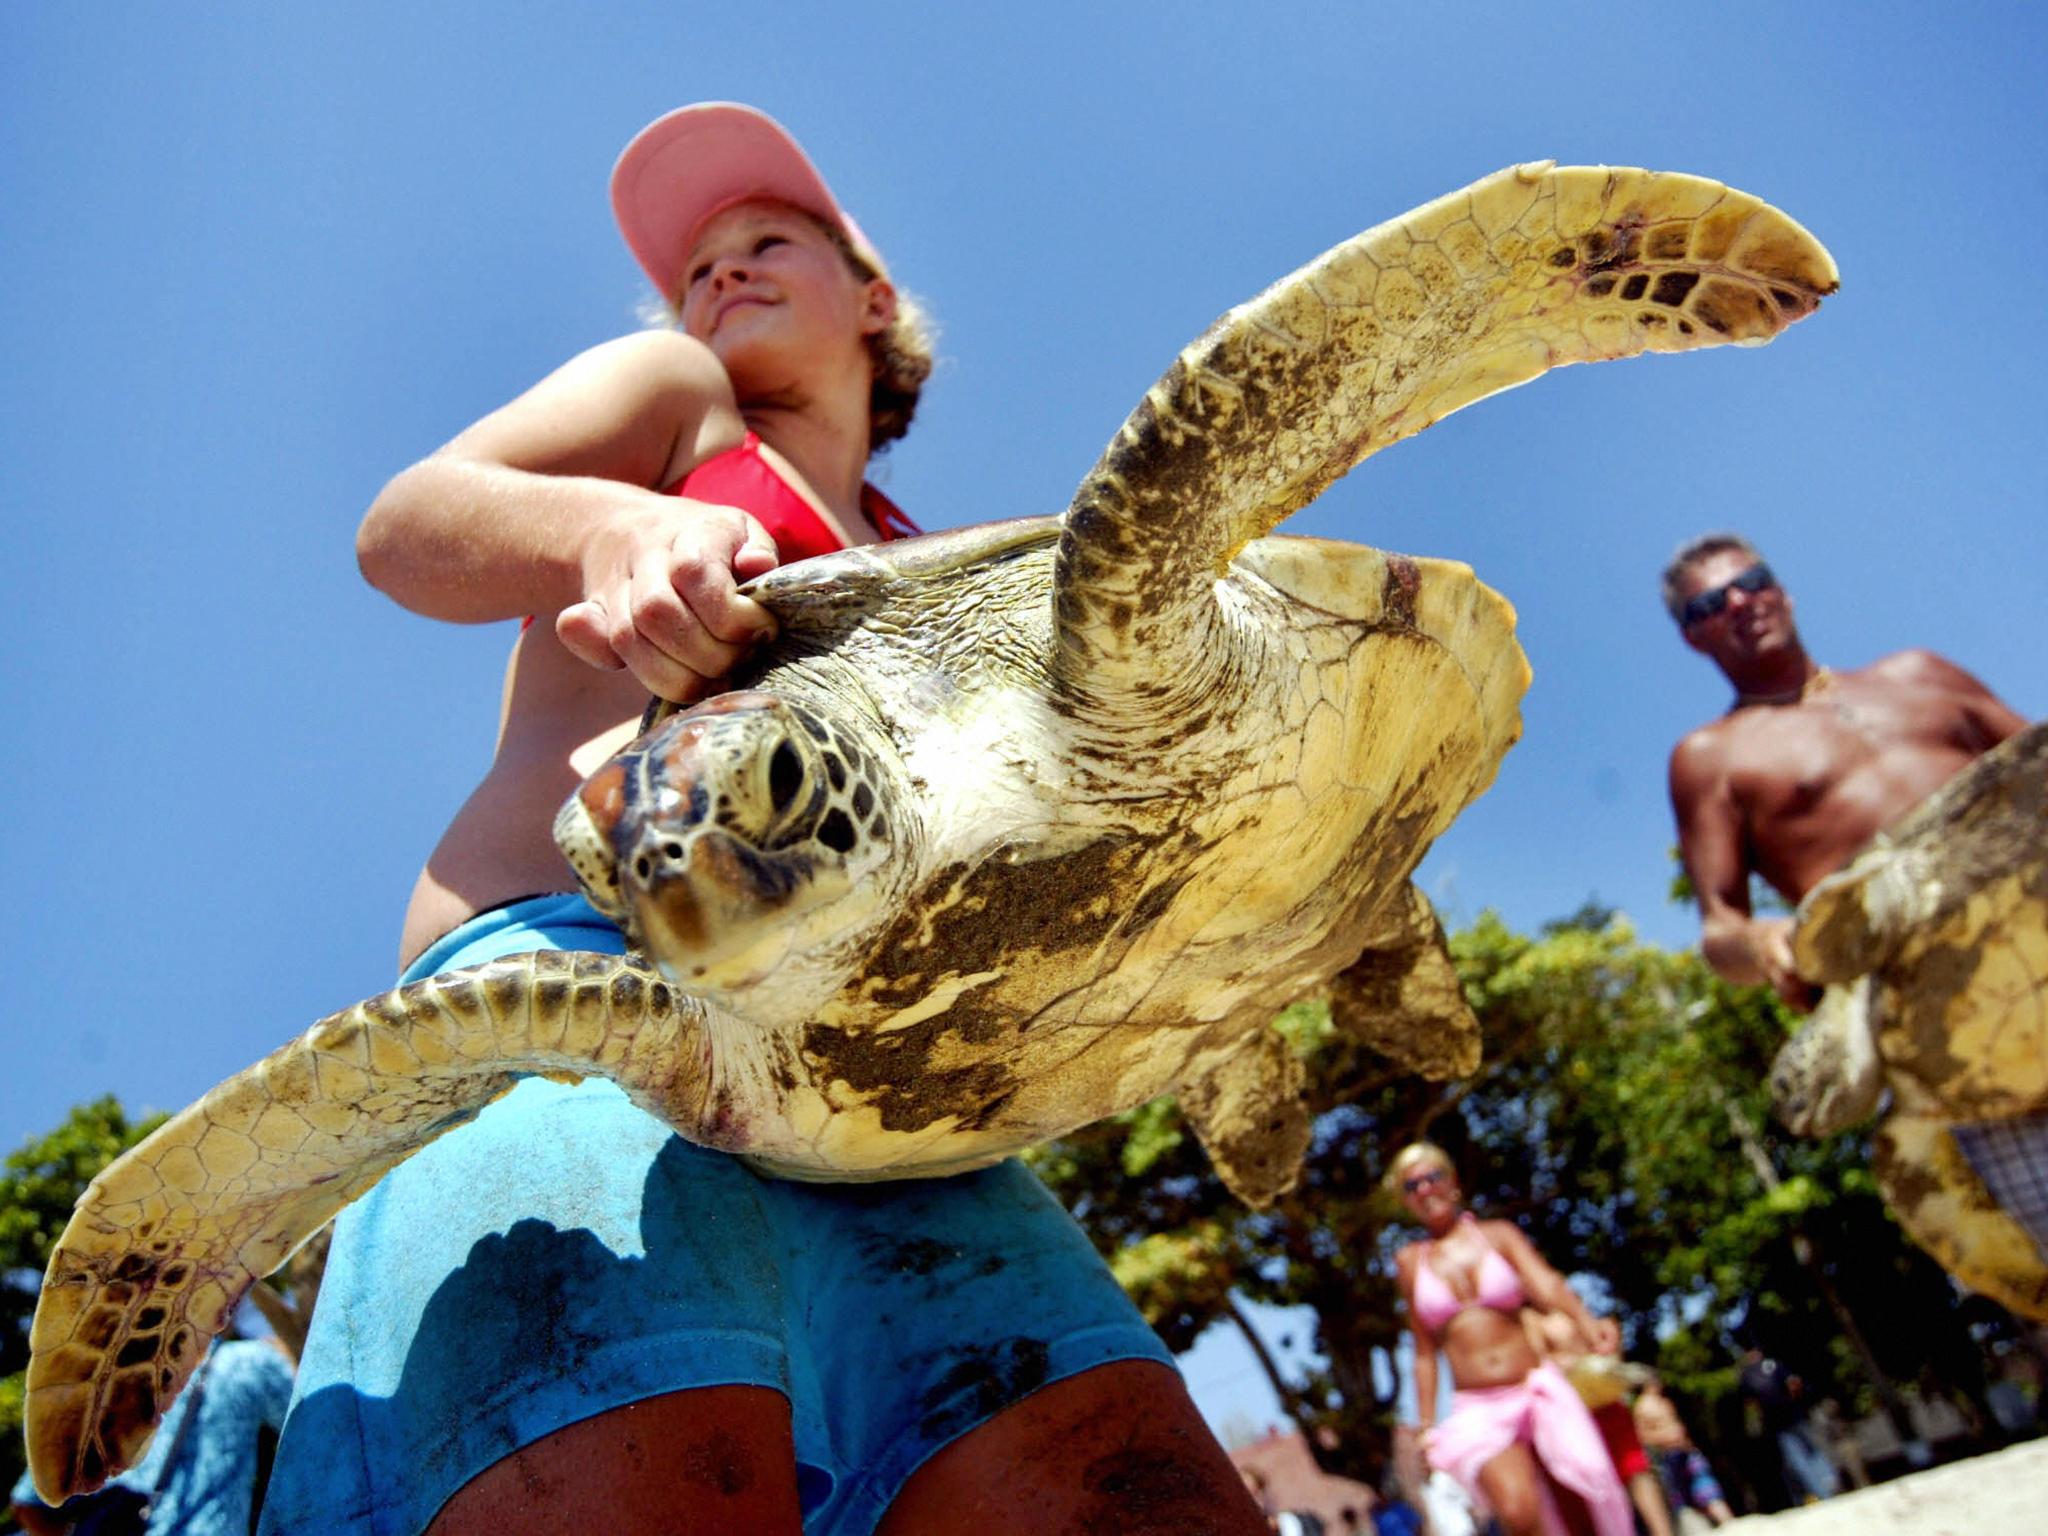 Shelling out: tourists help rescue sea turtles in Bali